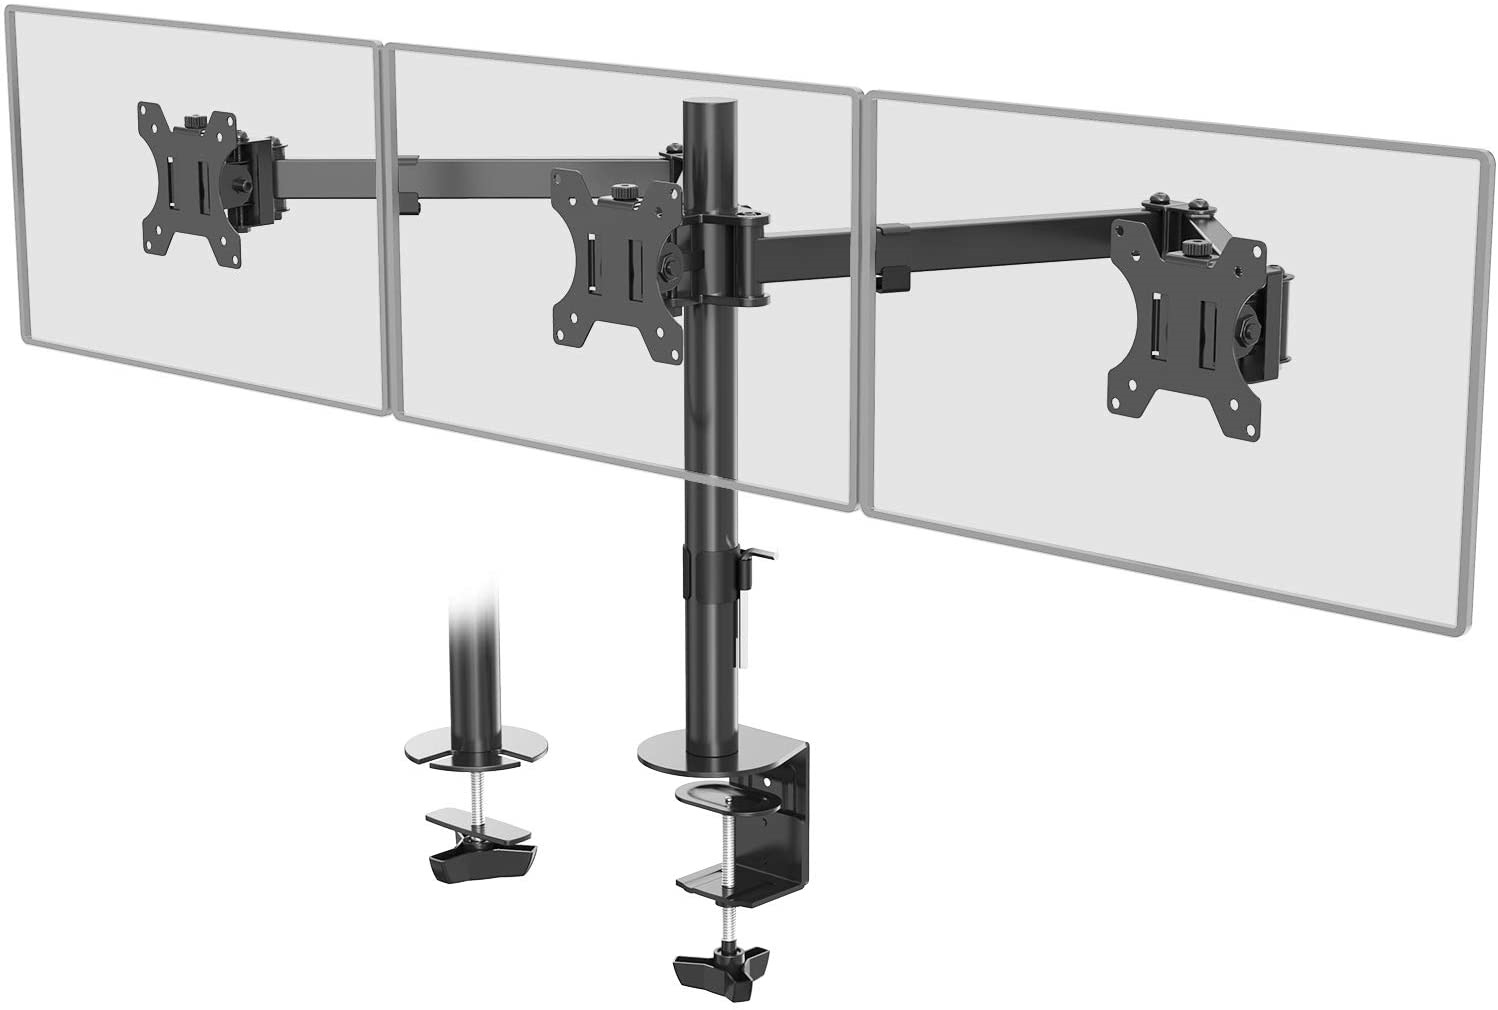 WALI Triple LCD Monitor Desk Mount Fully Adjustable Horizontal Stand Fits 3 up